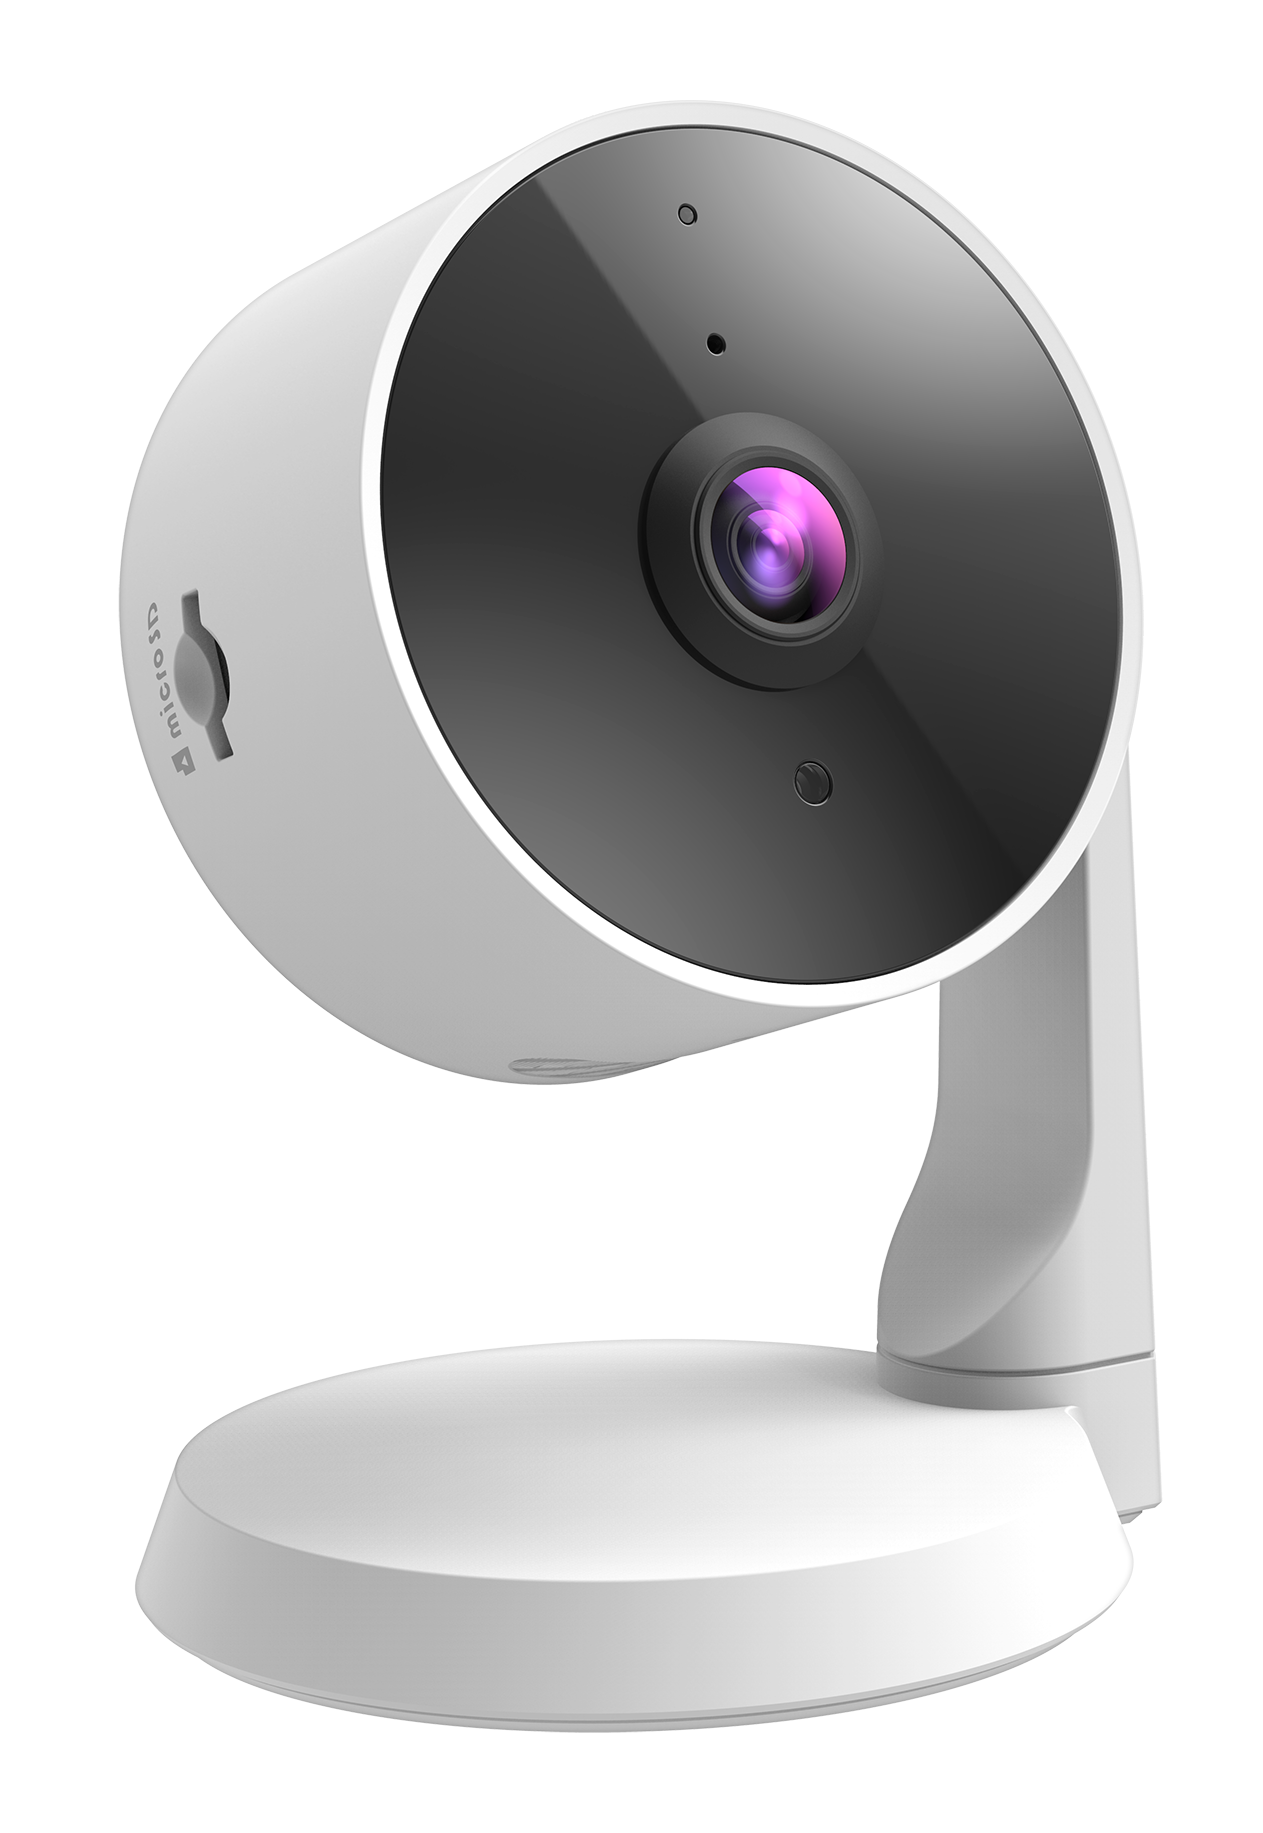 D-Link DCS-8325LH 1080p Camera with AI Motion Detection